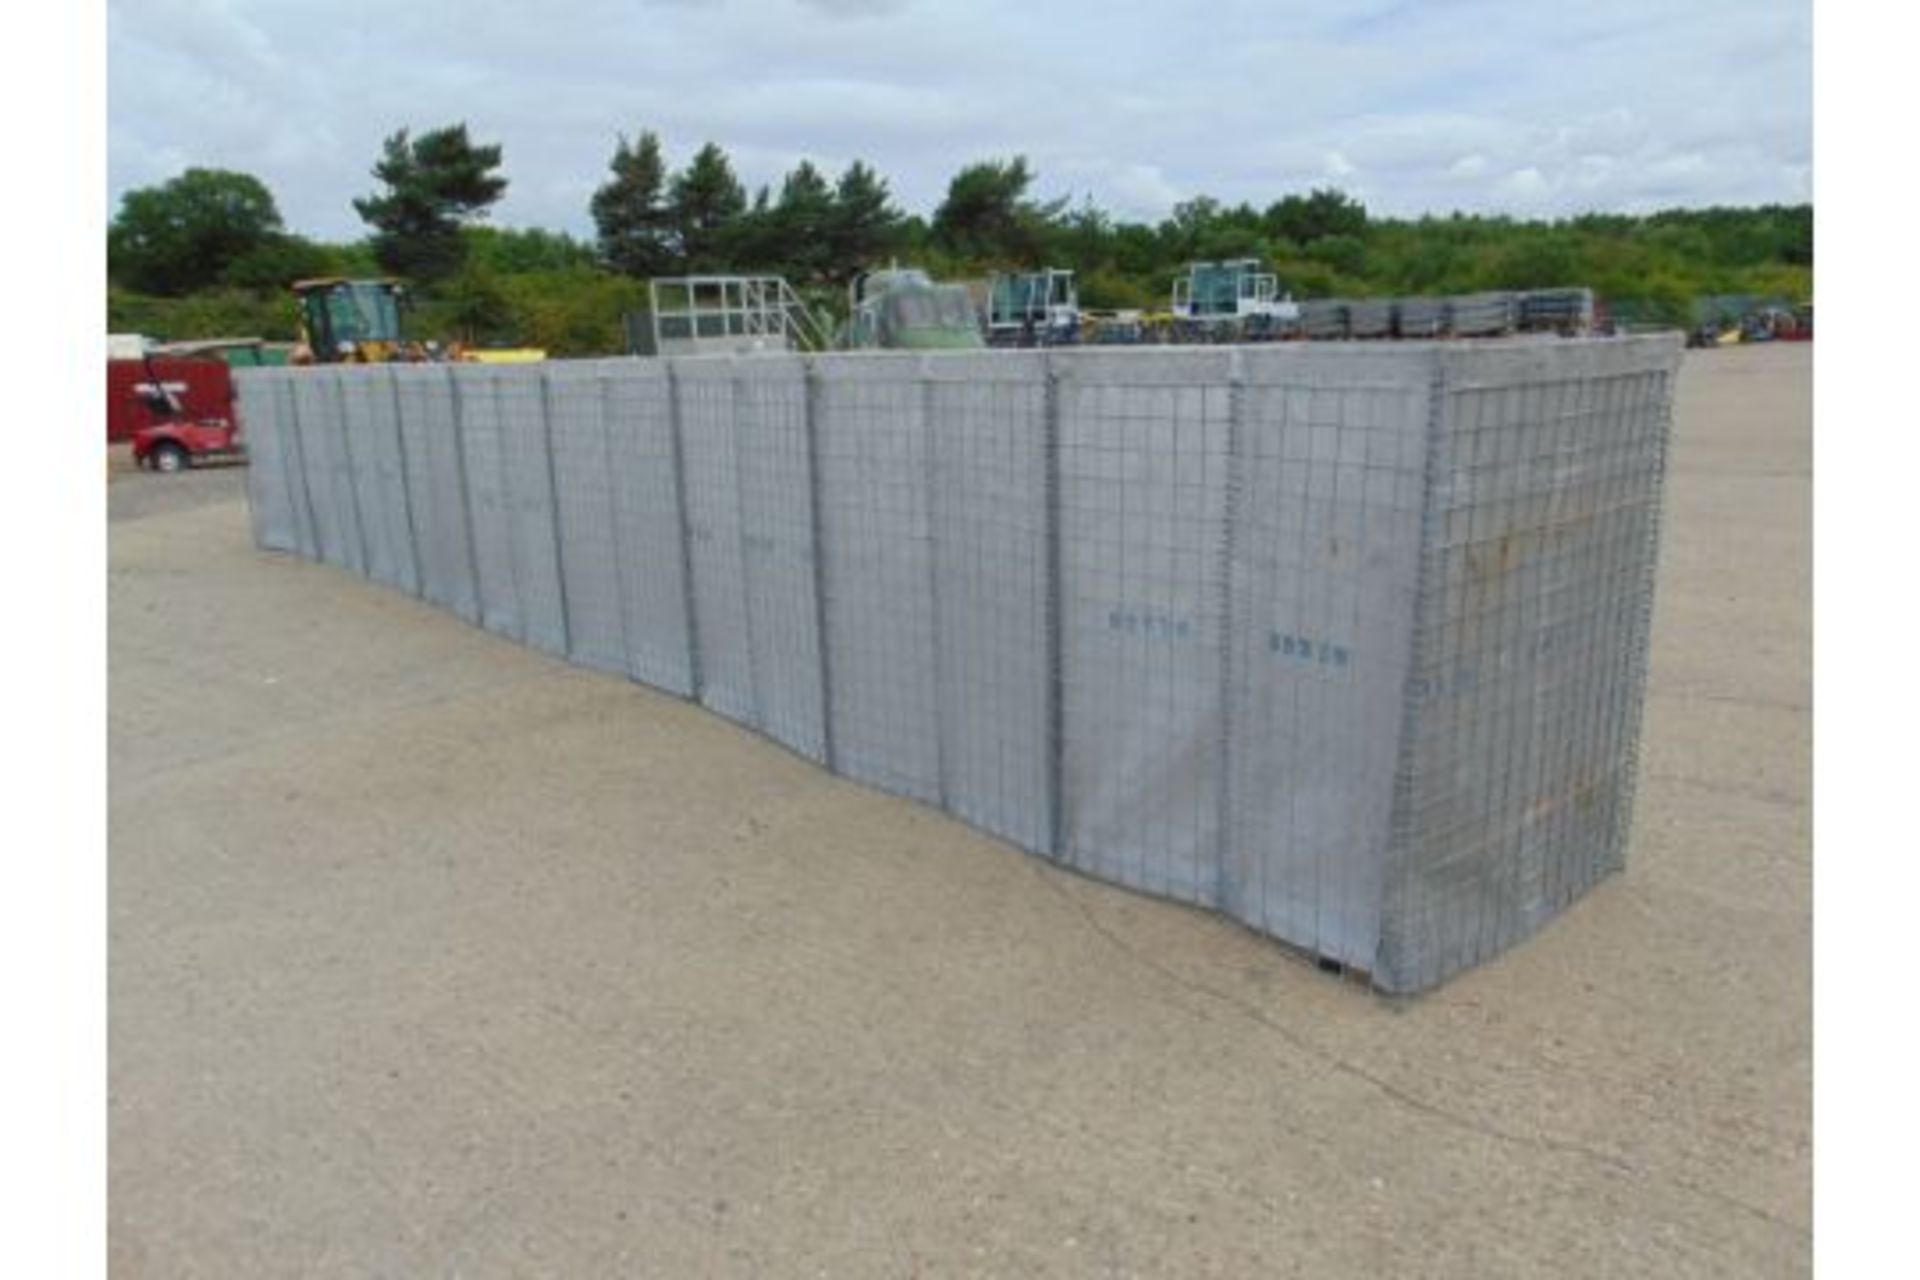 From UK MOD New Unissued HESCO Concertainer MIL 1 Height 1.37m Width 1.06m Length 10m - Bild 2 aus 7